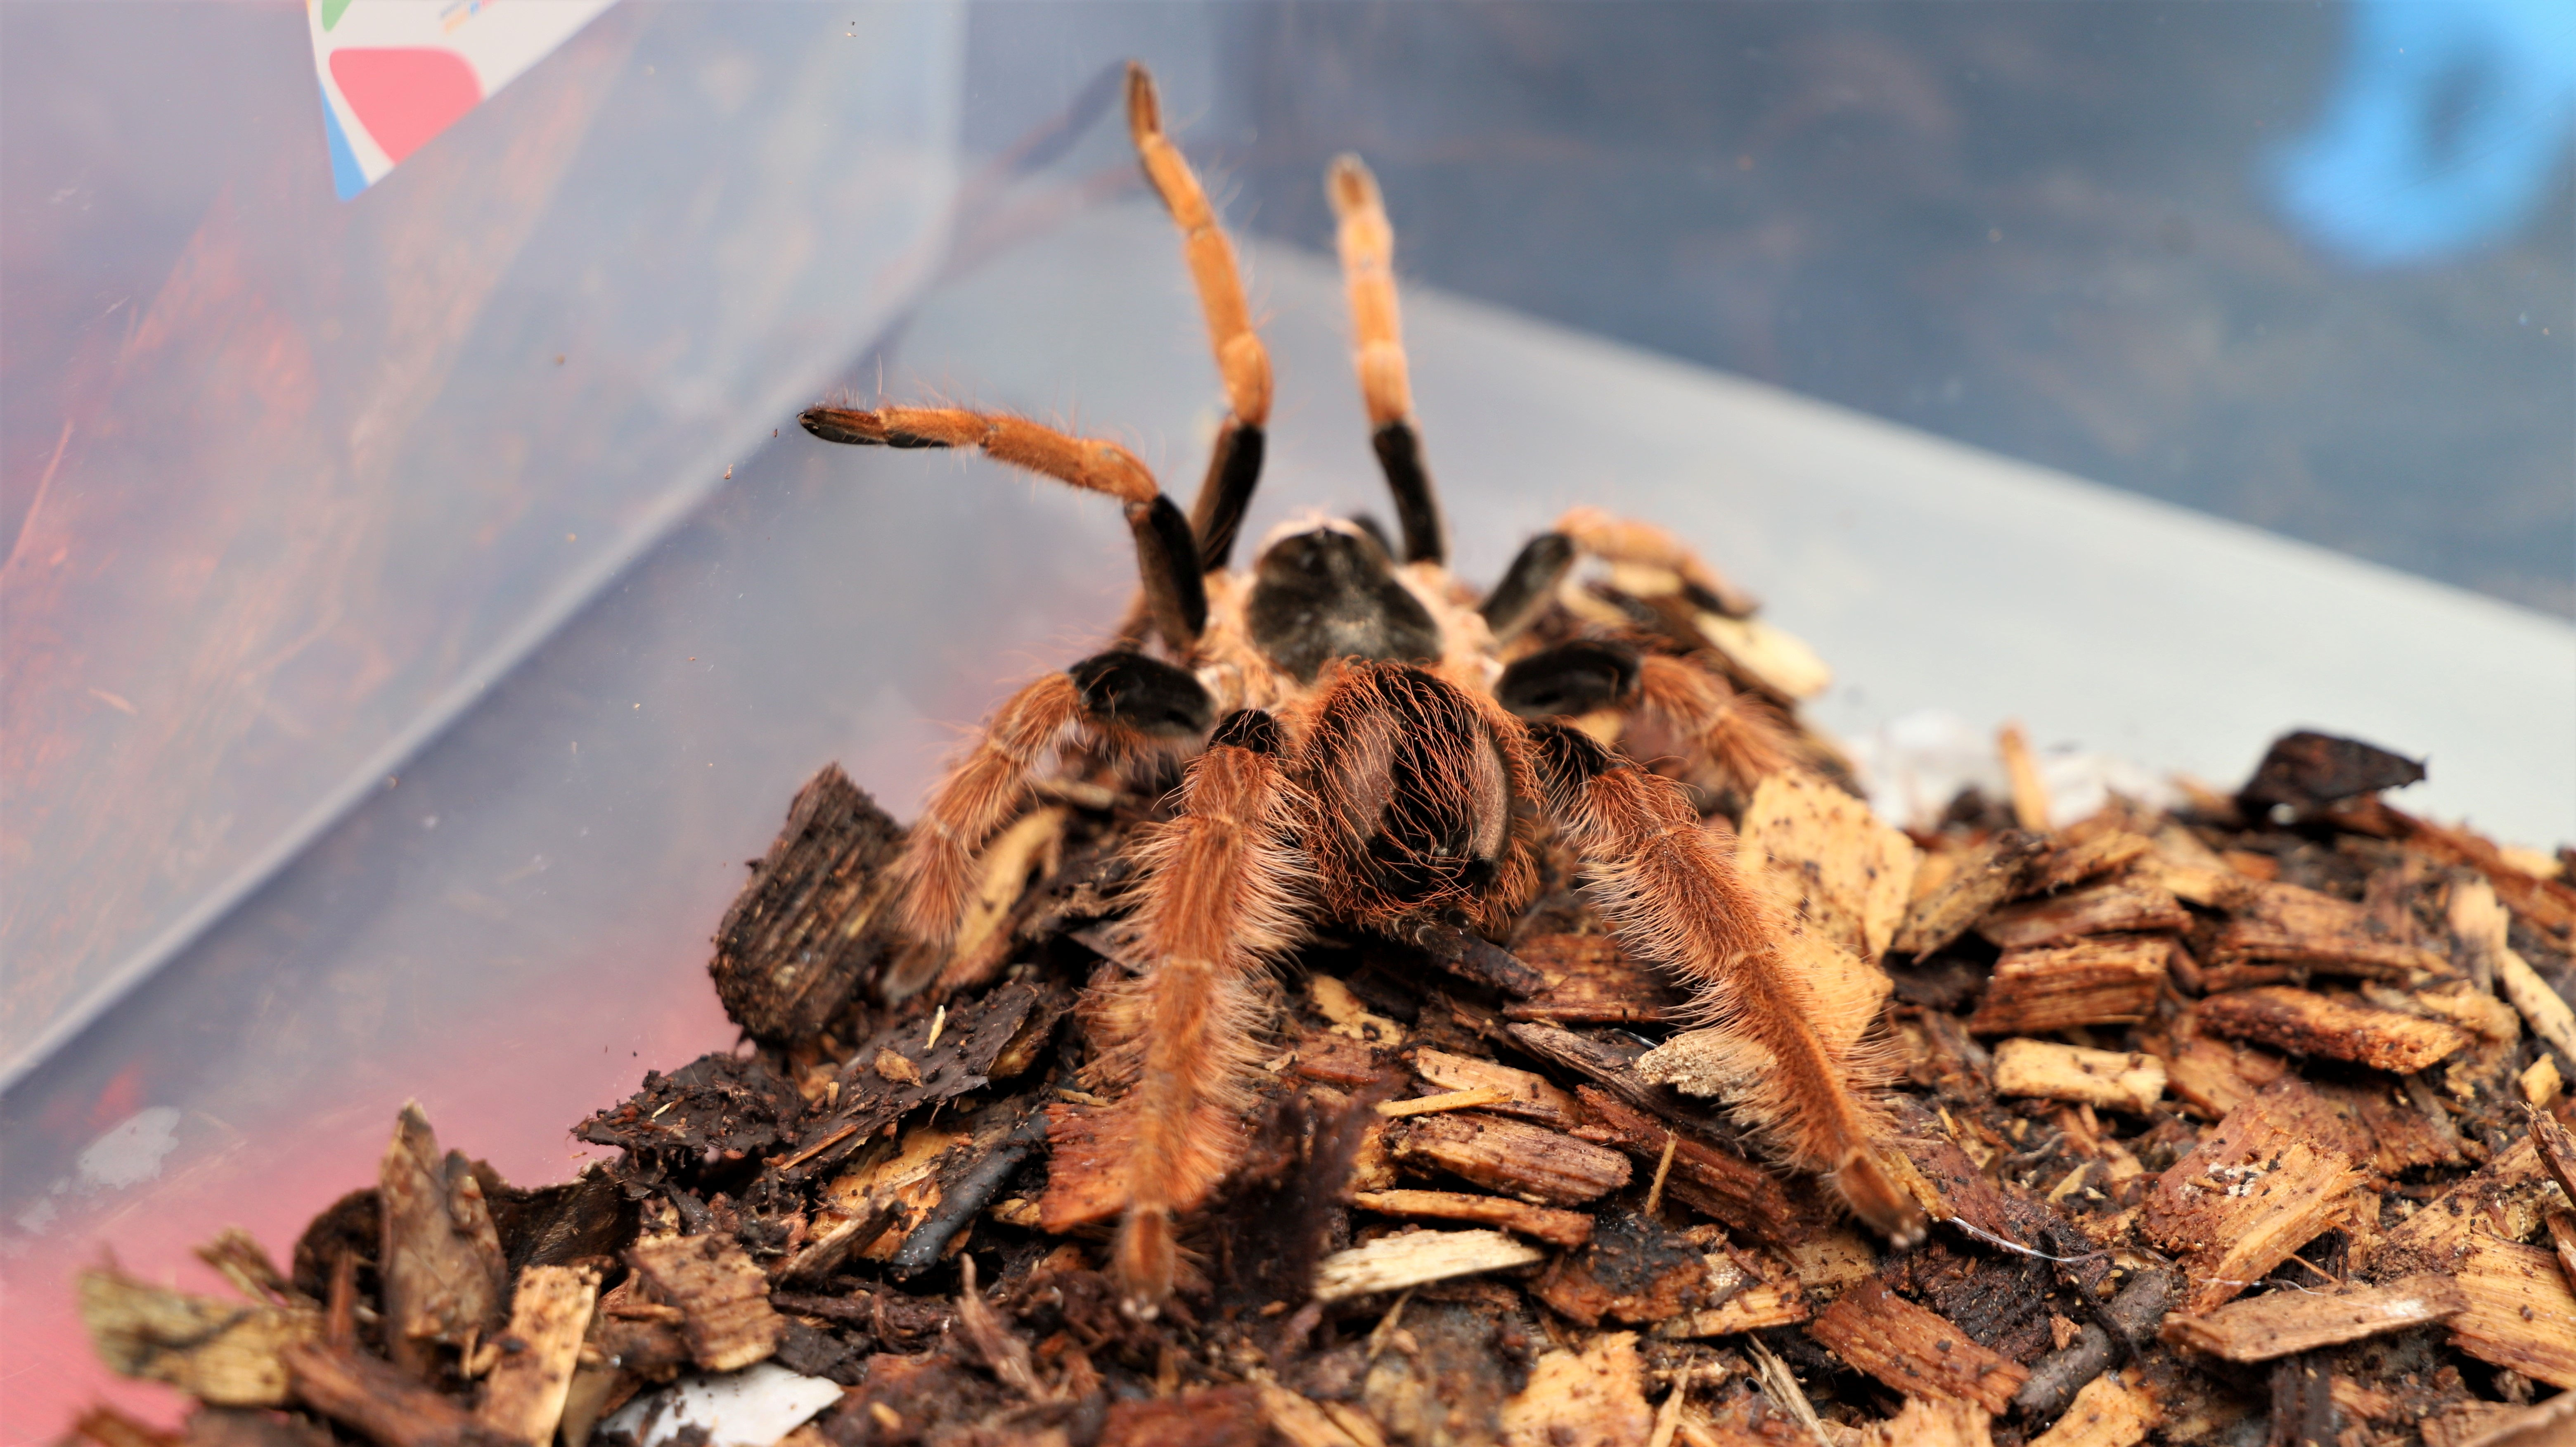 A tarantula is photographed after a seizure of animals for trafficking bound to Germany at El Dorado airport, in Bogota, Colombia December 1, 2021. Picture taken December 1, 2021. Courtesy of District Secretary of the Environment of Bogota/Handout via REUTERS